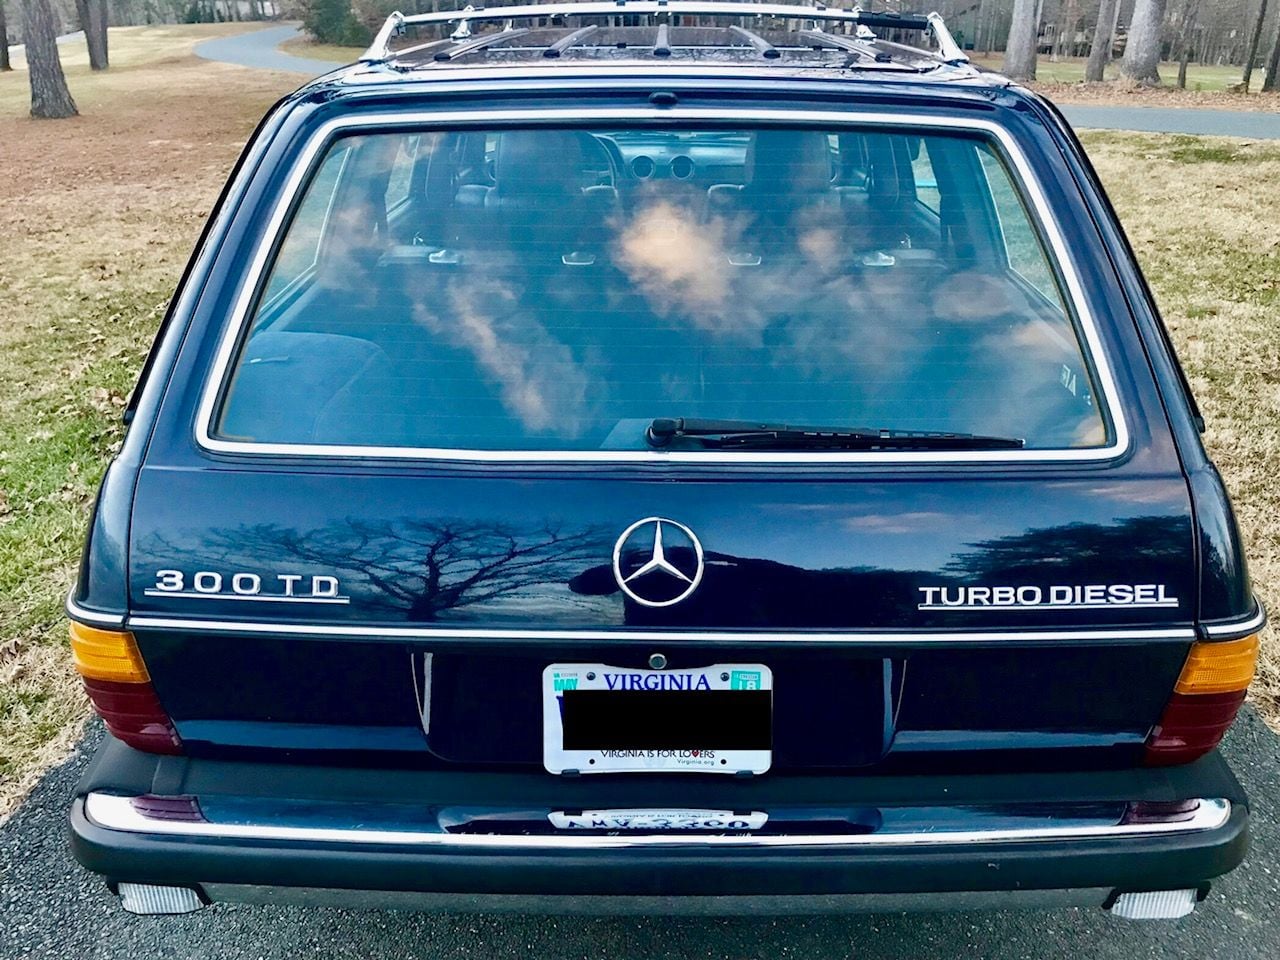 1985 Mercedes-Benz 300TD - 1985 Mercedes Benz 300TD, Great condition, Runs Well! - Used - VIN WRBAB93CXFF040373 - 240,000 Miles - 5 cyl - 2WD - Automatic - Wagon - Blue - Charlottesville, VA 22901, United States